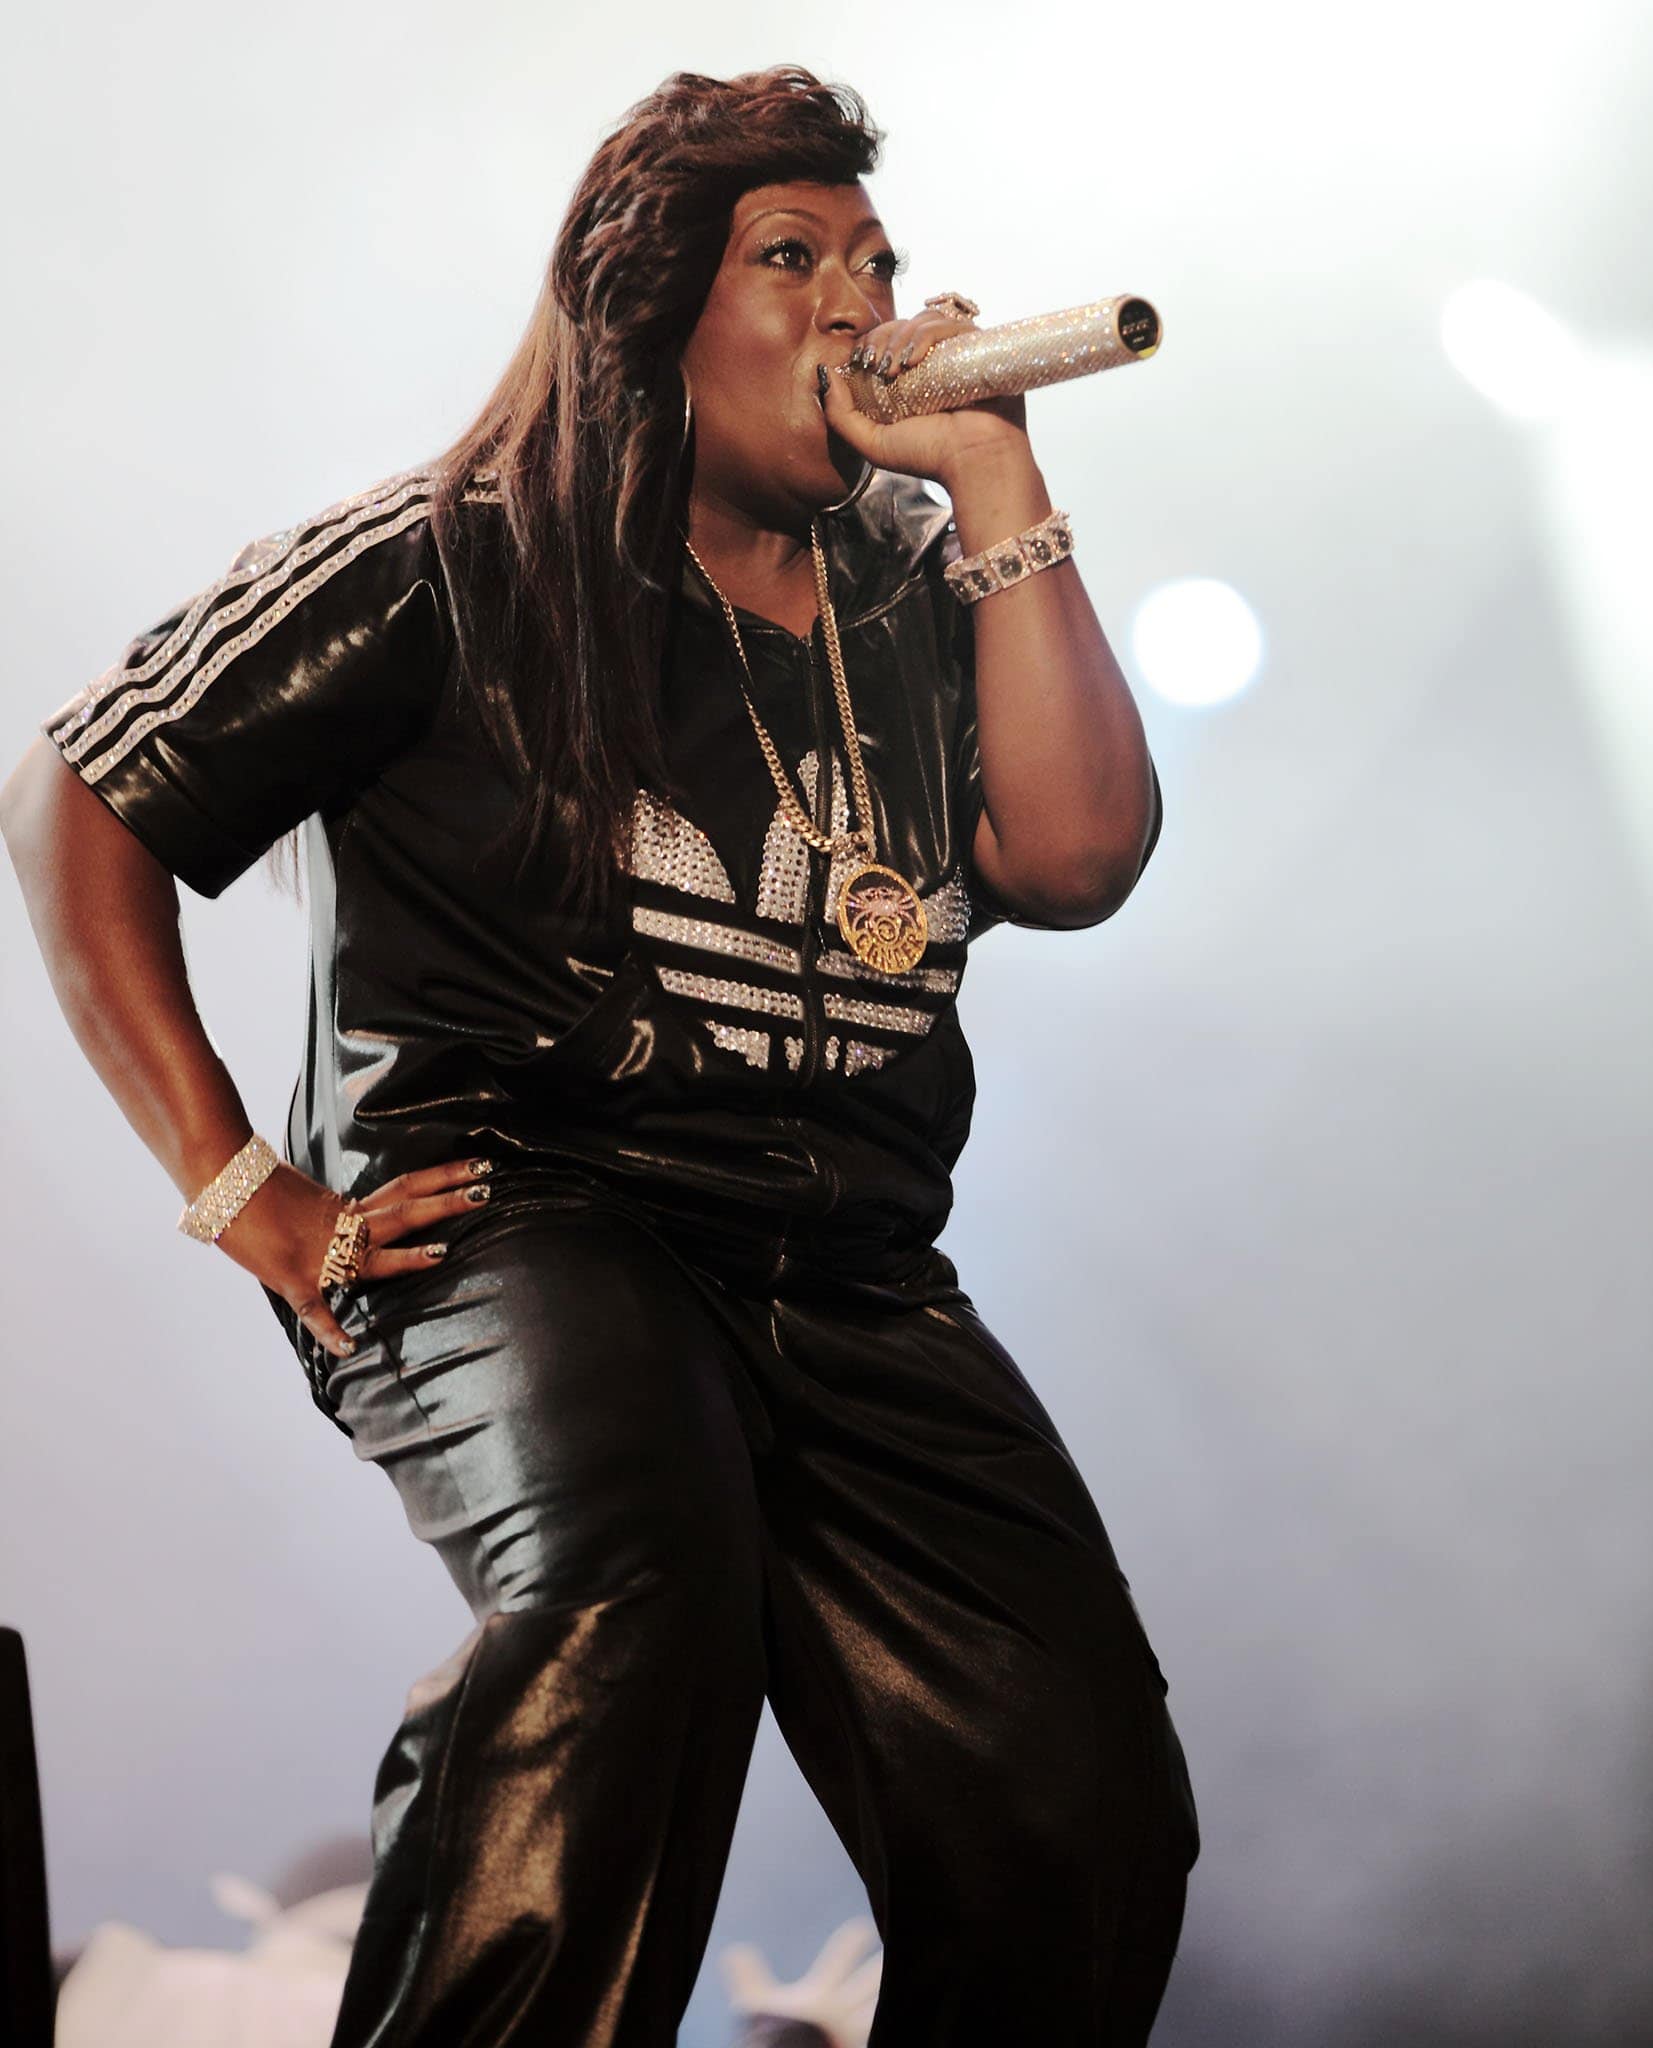 In 1997, Missy Elliott released her solo debut album Supa Dupa Fly, which was certified platinum